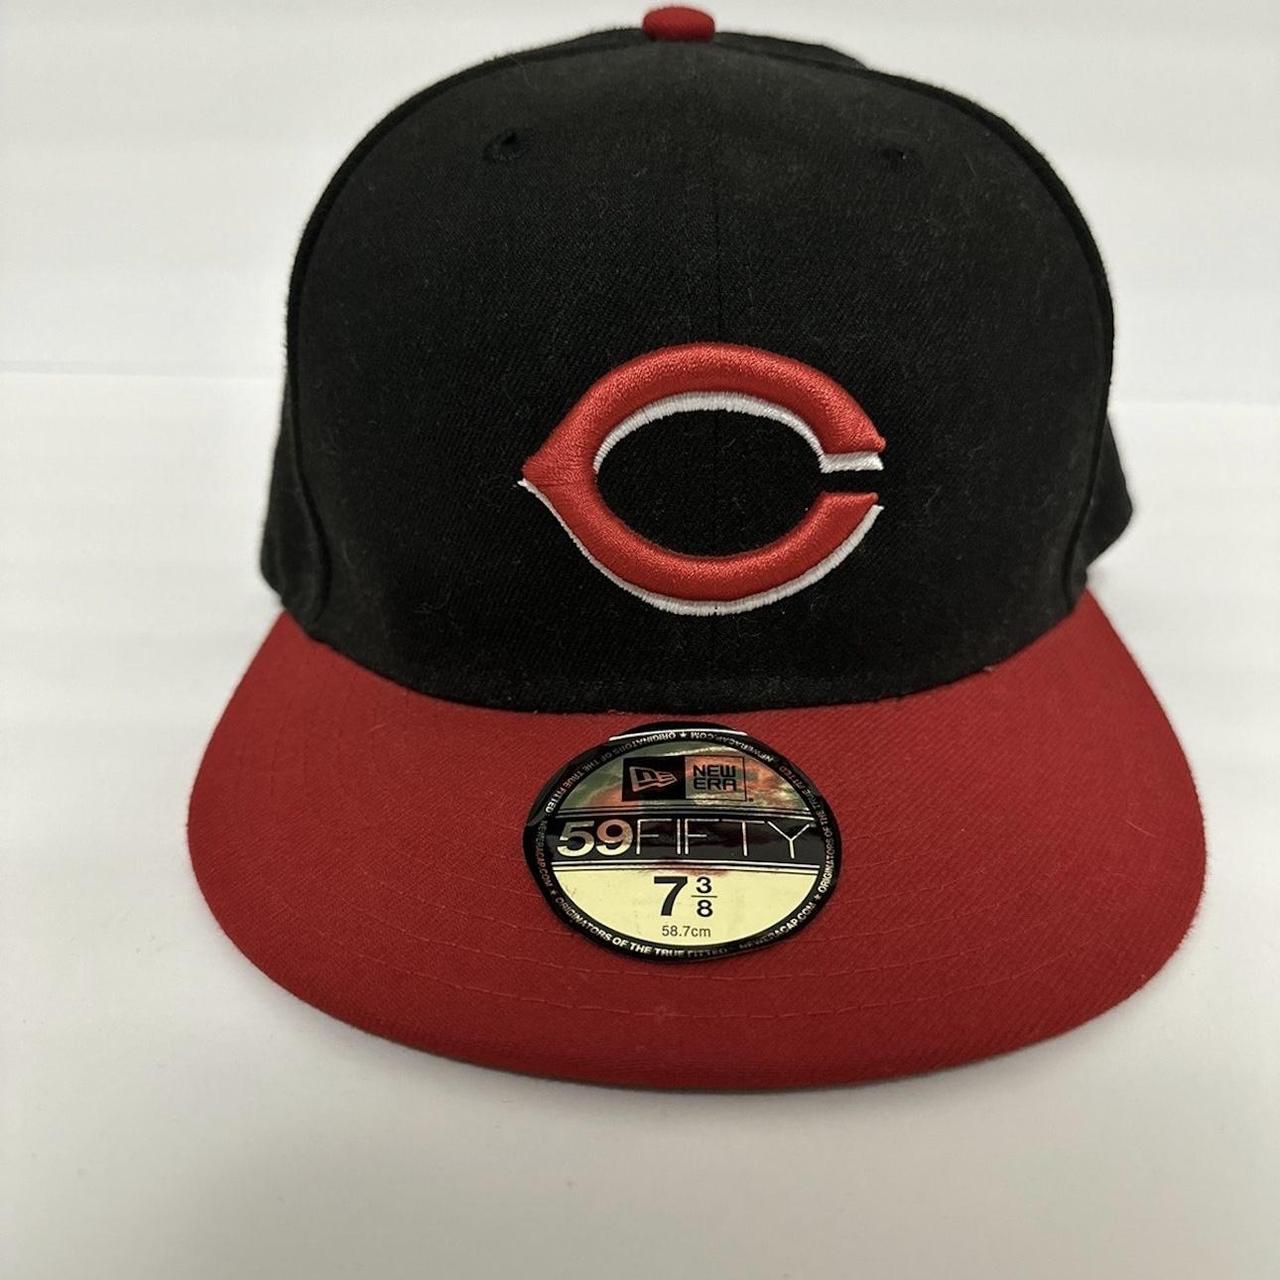 New Era Cincinnati Reds 59FIFTY Authentic Collection Hat Black/Red 7 3/4